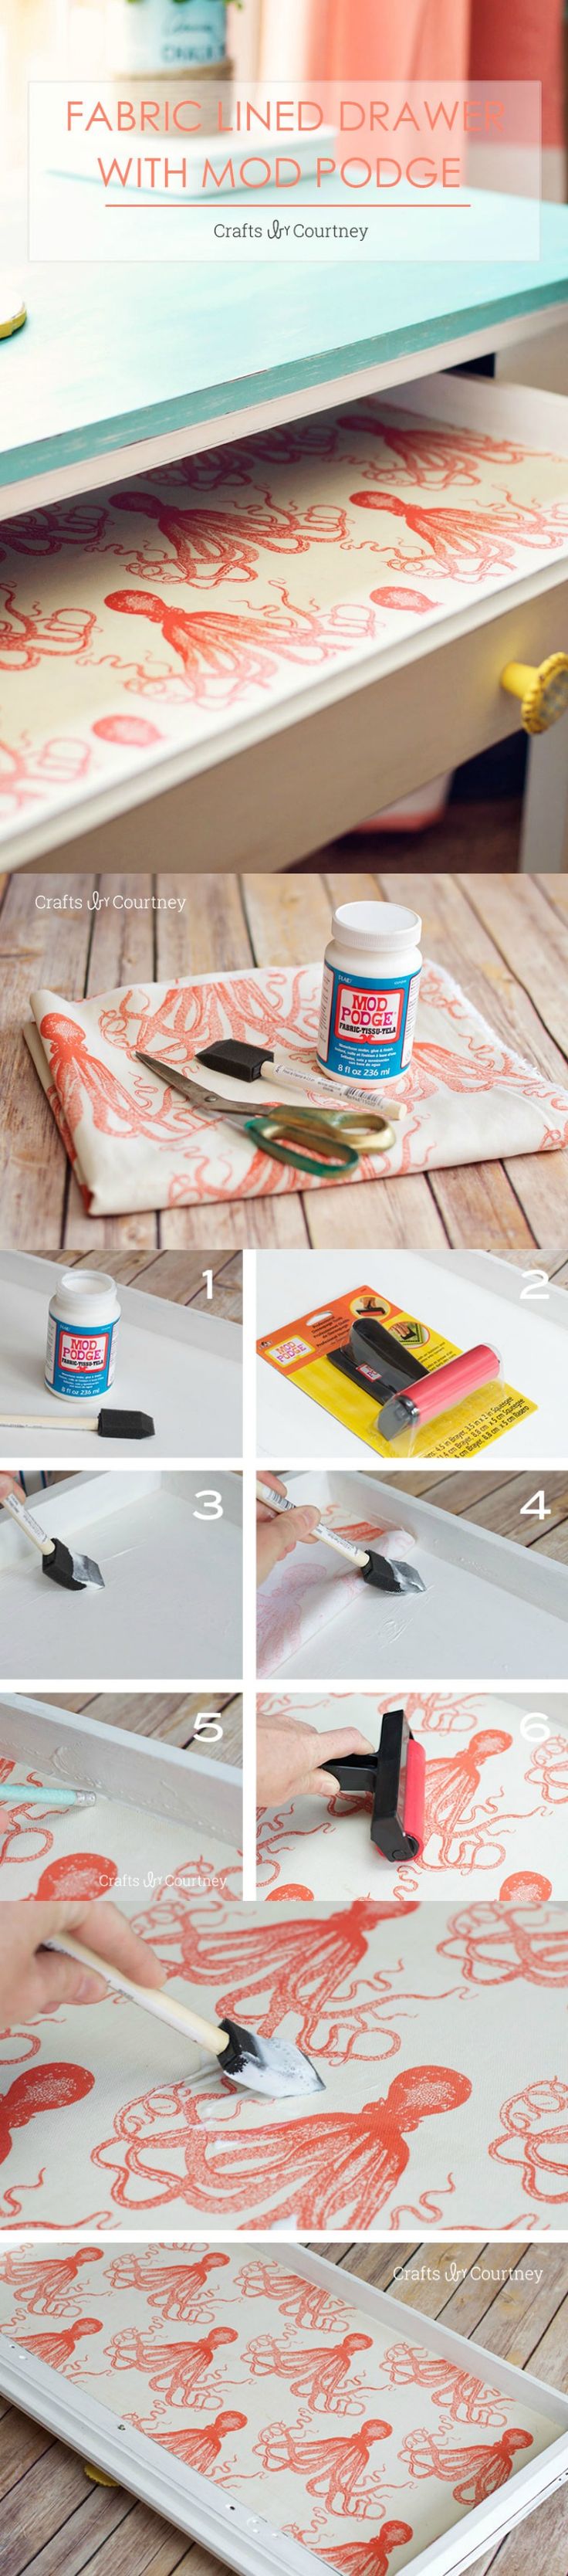 Use Mod Podge and your favorite fabric pattern to create these unique fabric lin...